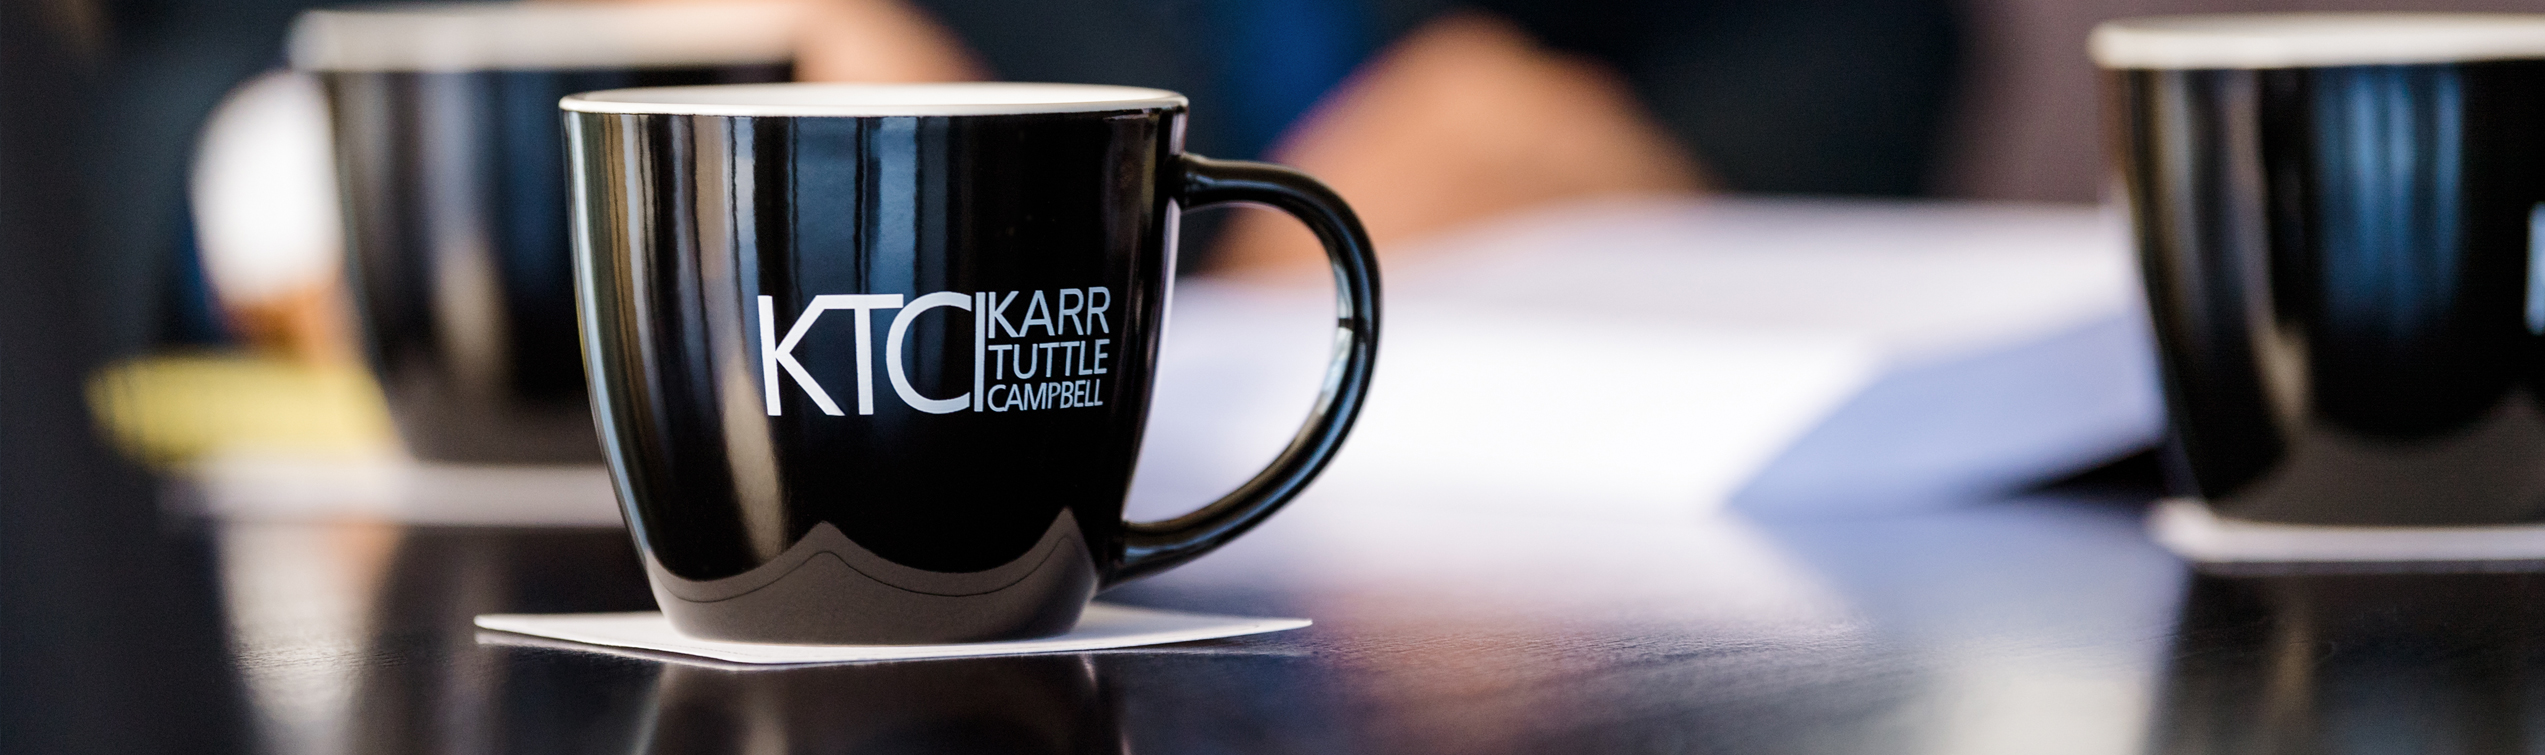 Table with coffee cups displaying KTC logo.